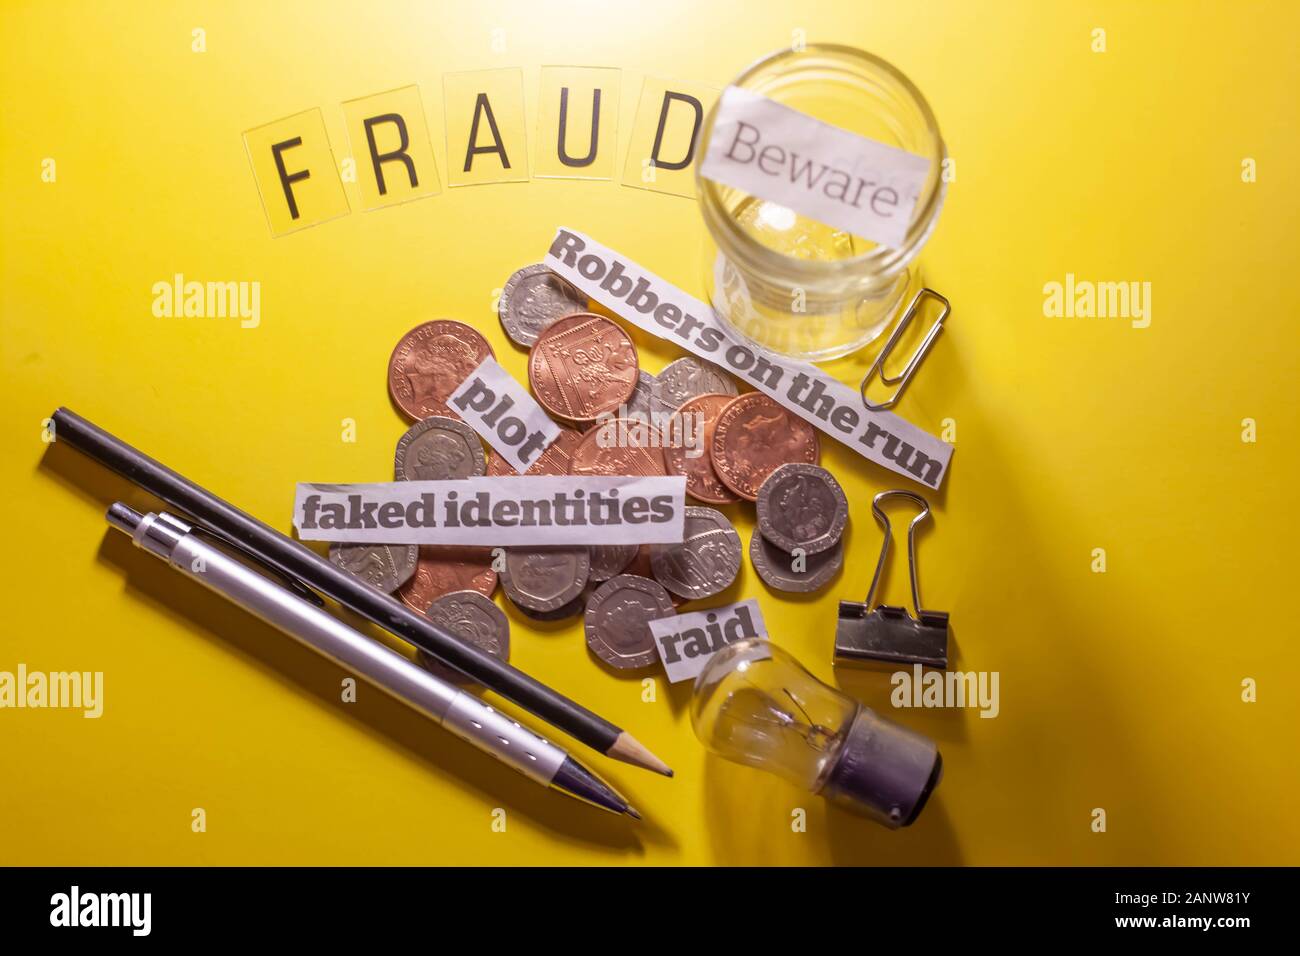 Flat lay still life on concept of fraud & scams. Yellow background. Copyspace. Stock Photo